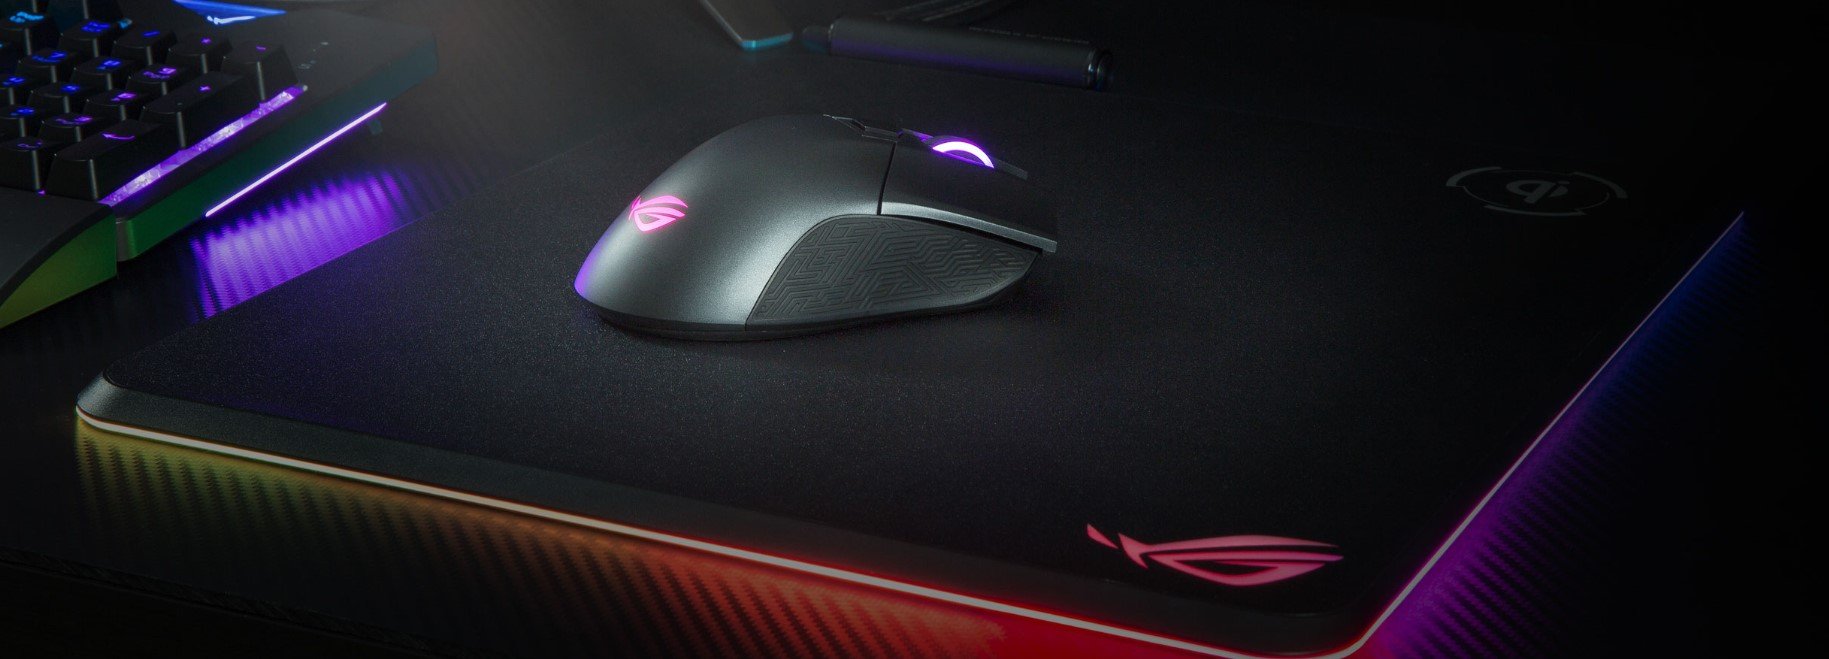 Asus_ROG_Gladius_II_Wireless_Gaming_Mouse_sold_by_Technomobi_2